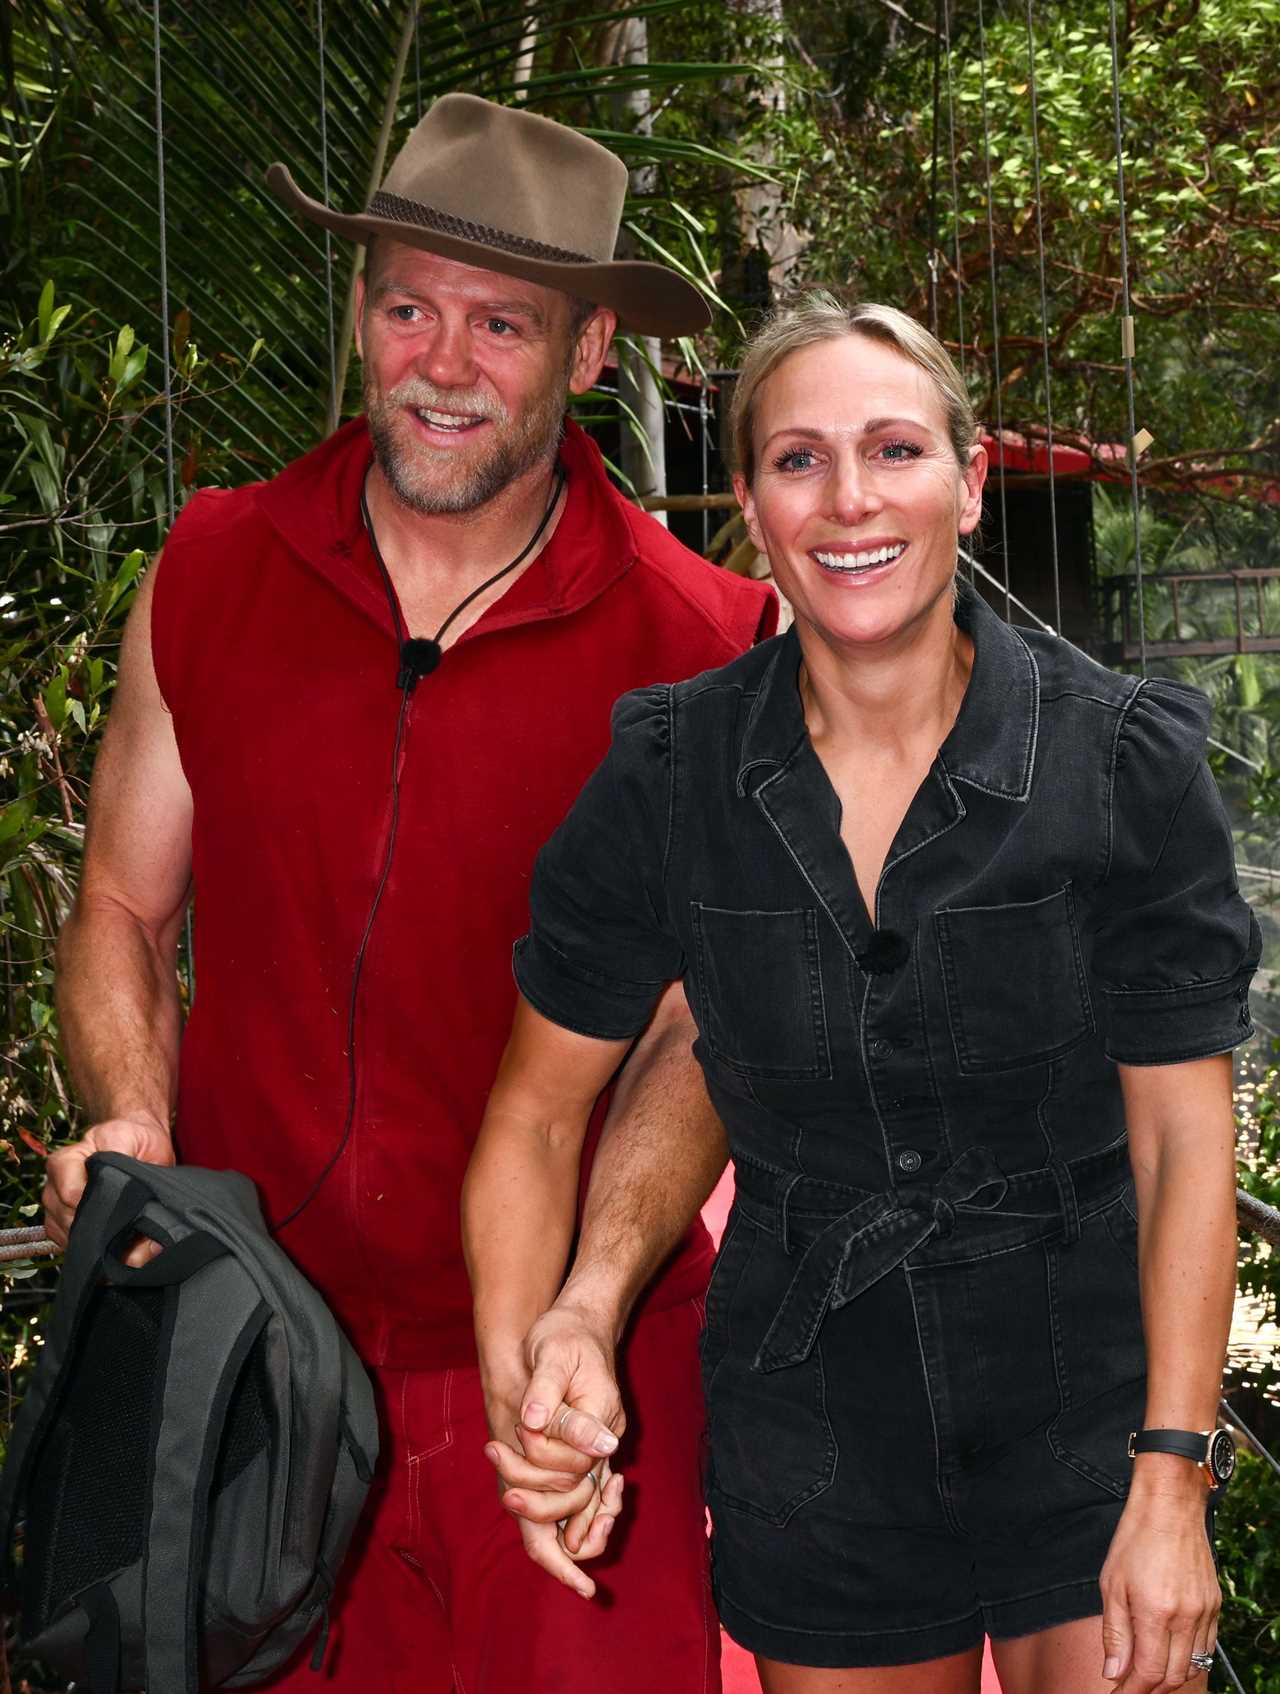 Zara Tindall goes barefoot as she leaves boozy I’m A Celeb wrap party with husband Mike and Owen Warner